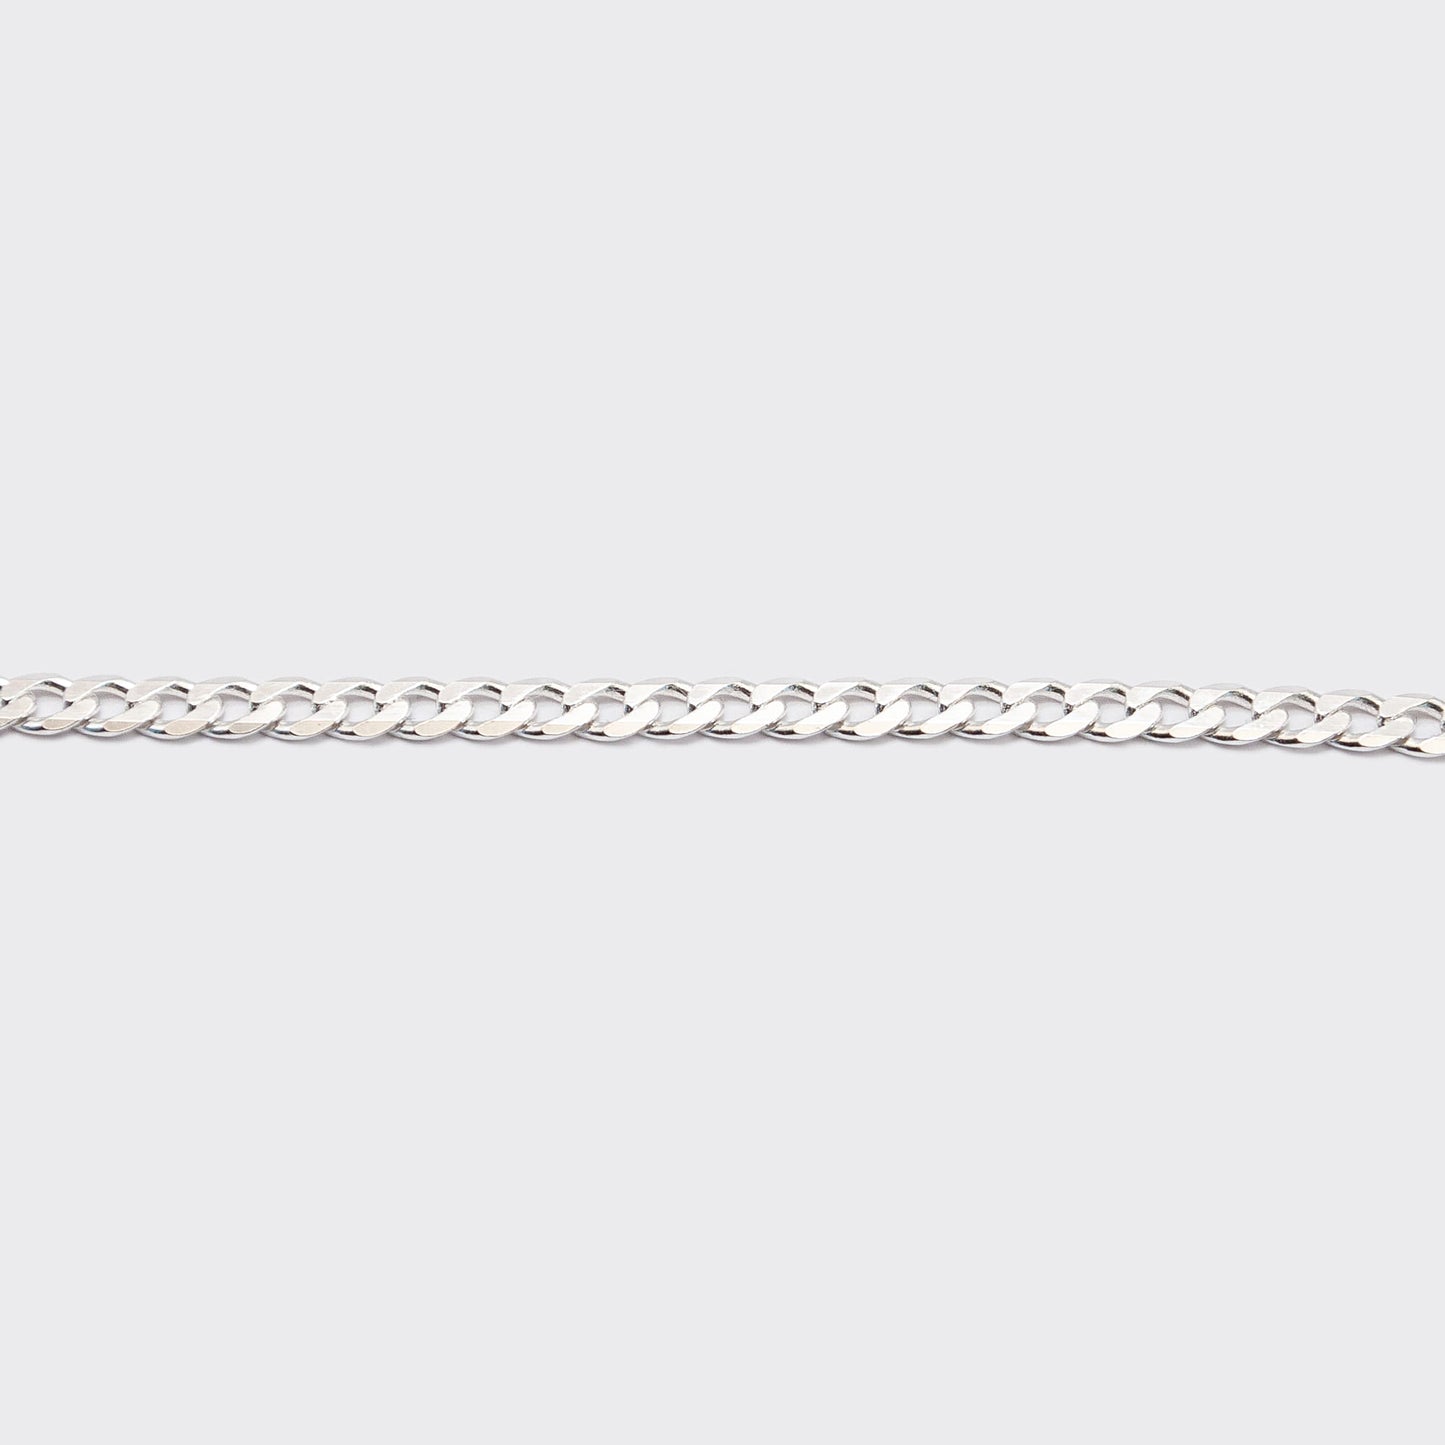 The Cuban chain is an elegant and unisex piece of jewelry, crafted in Italy and made of 925 Sterling Silver. Every jewelry is designed by Atelier Domingo's in France and is made to be worn by both men and women.